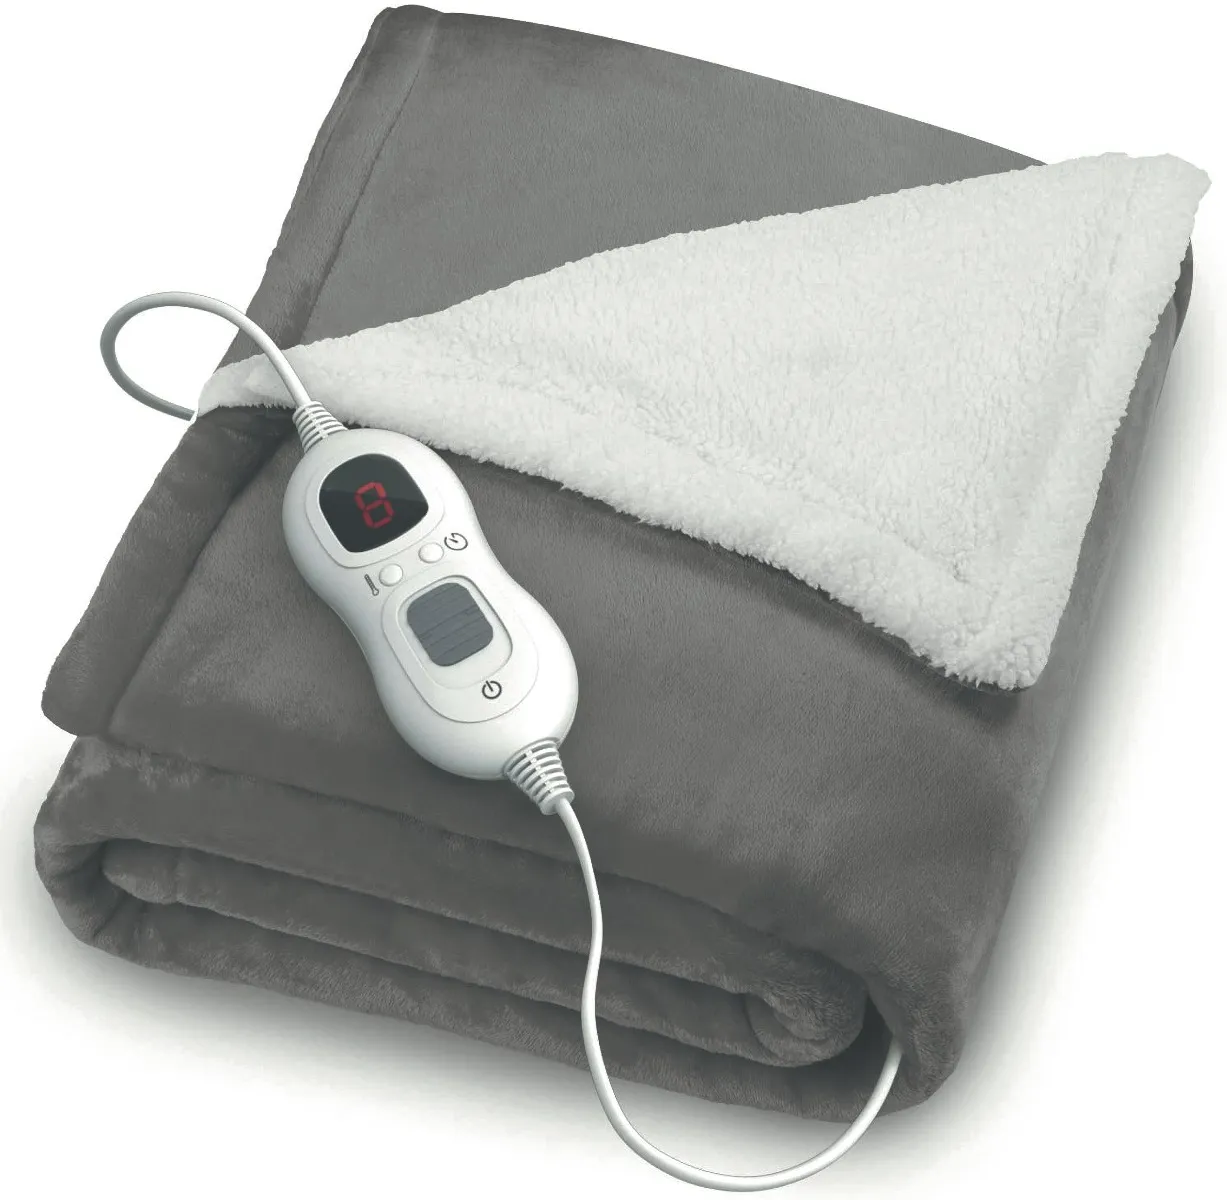 Energy-efficient heated blanket with digital remote control.